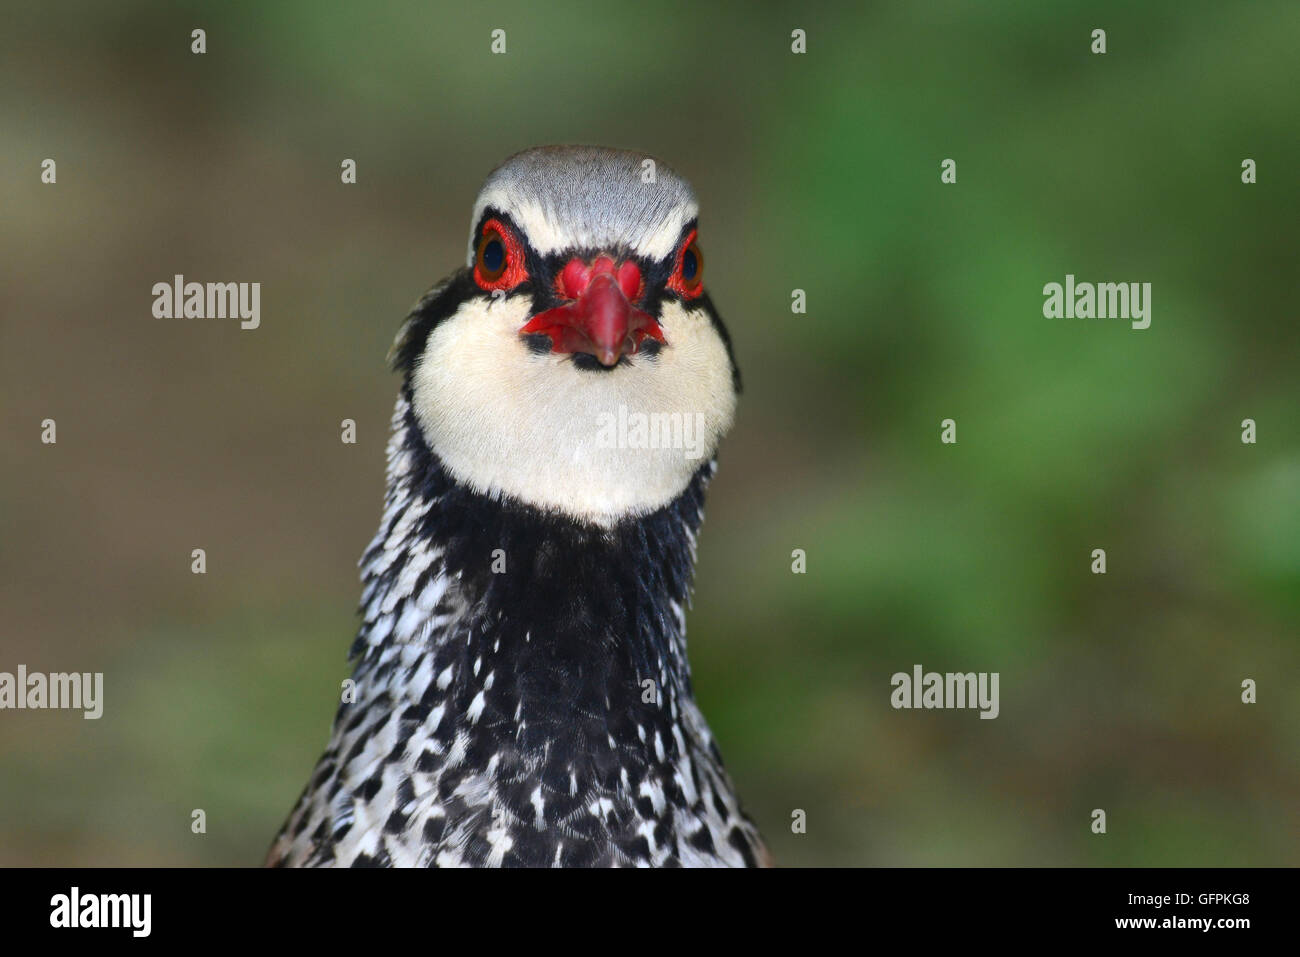 The face and head of a red-legged partridge UK Stock Photo